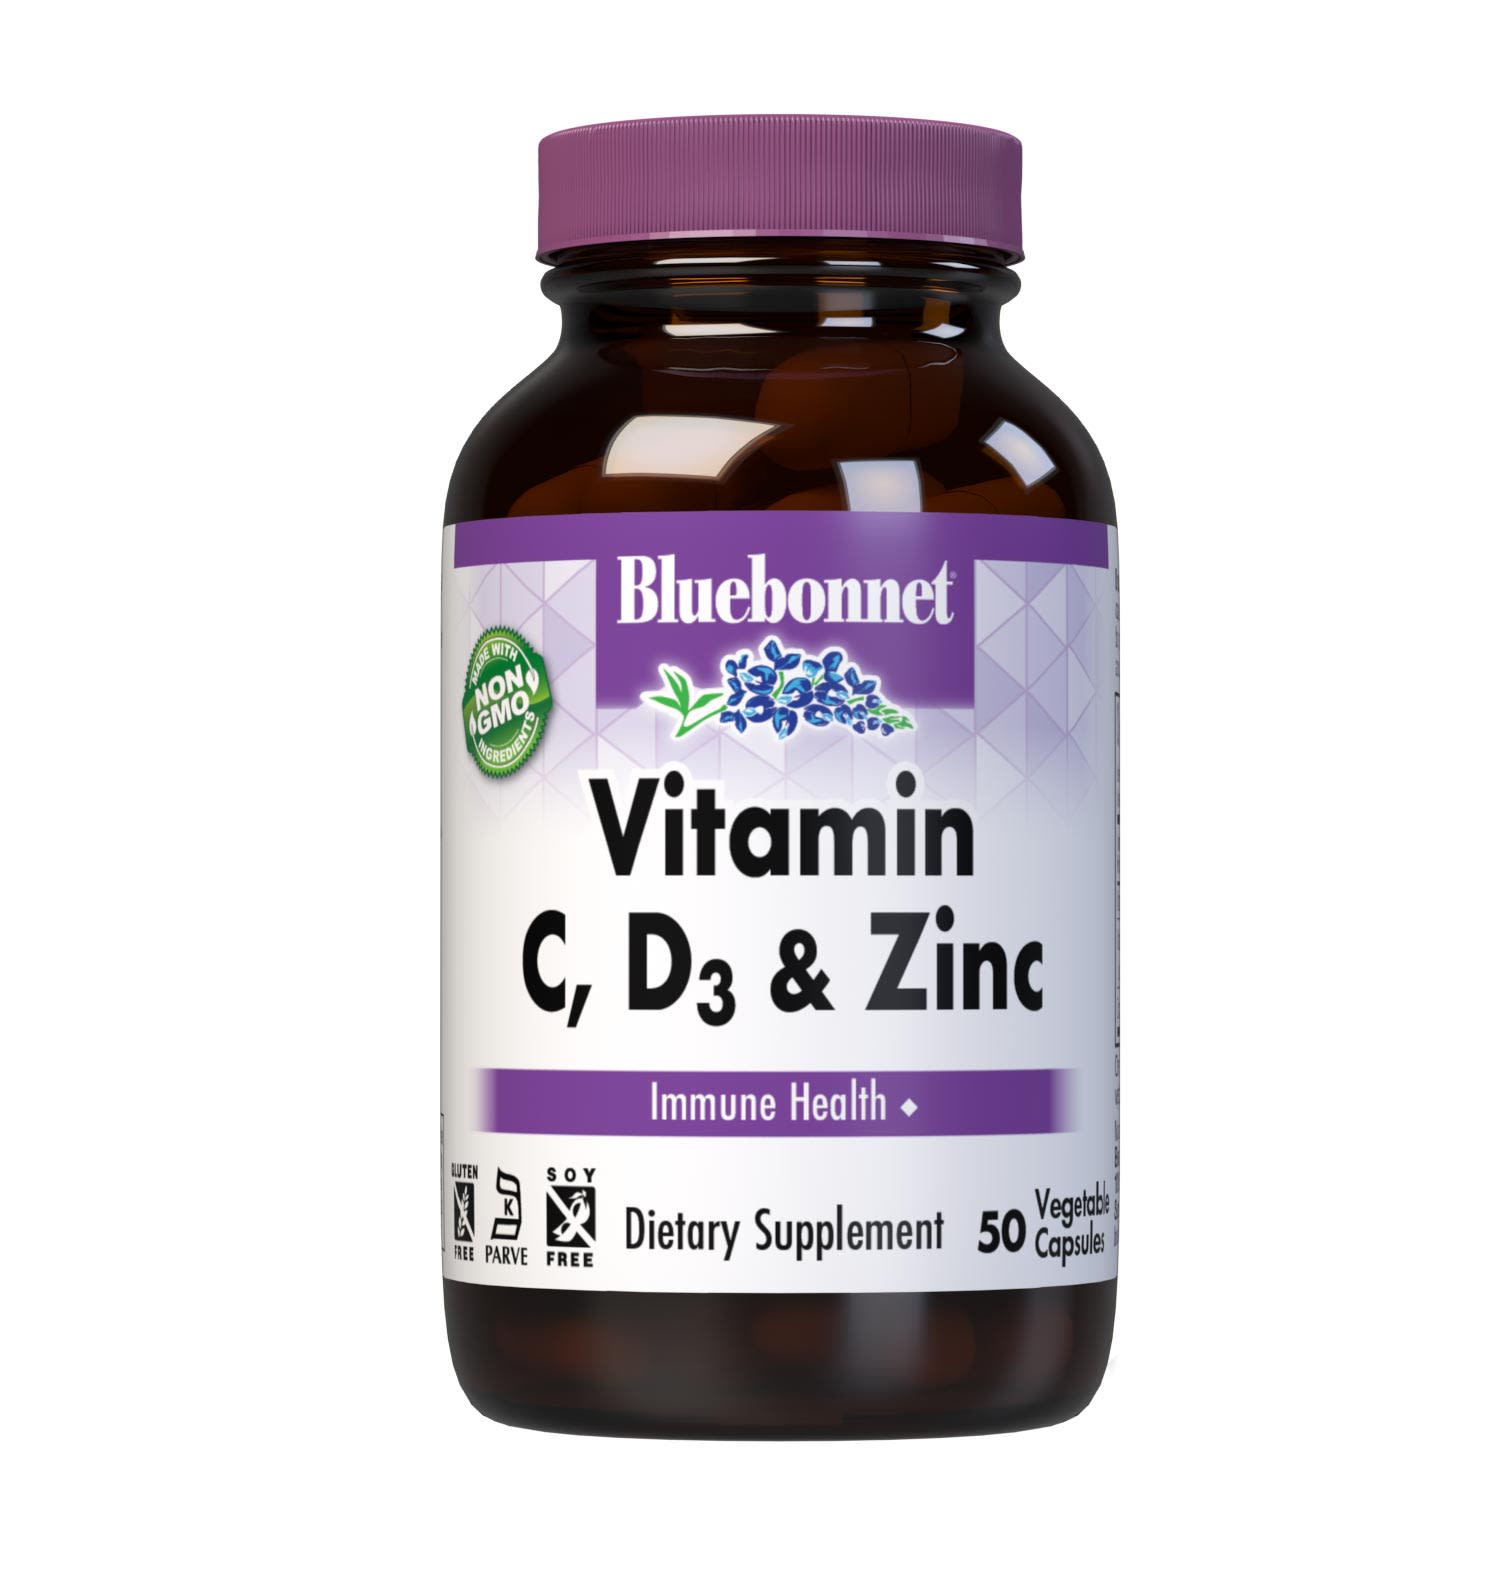 Bluebonnet’s Vitamin C, D3 & Zinc 50 Vegetable Capsules are specially formulated with antioxidants and immune nutrients-vitamin C, vitamin D3 and zinc to support immune health and well being. #size_50 count